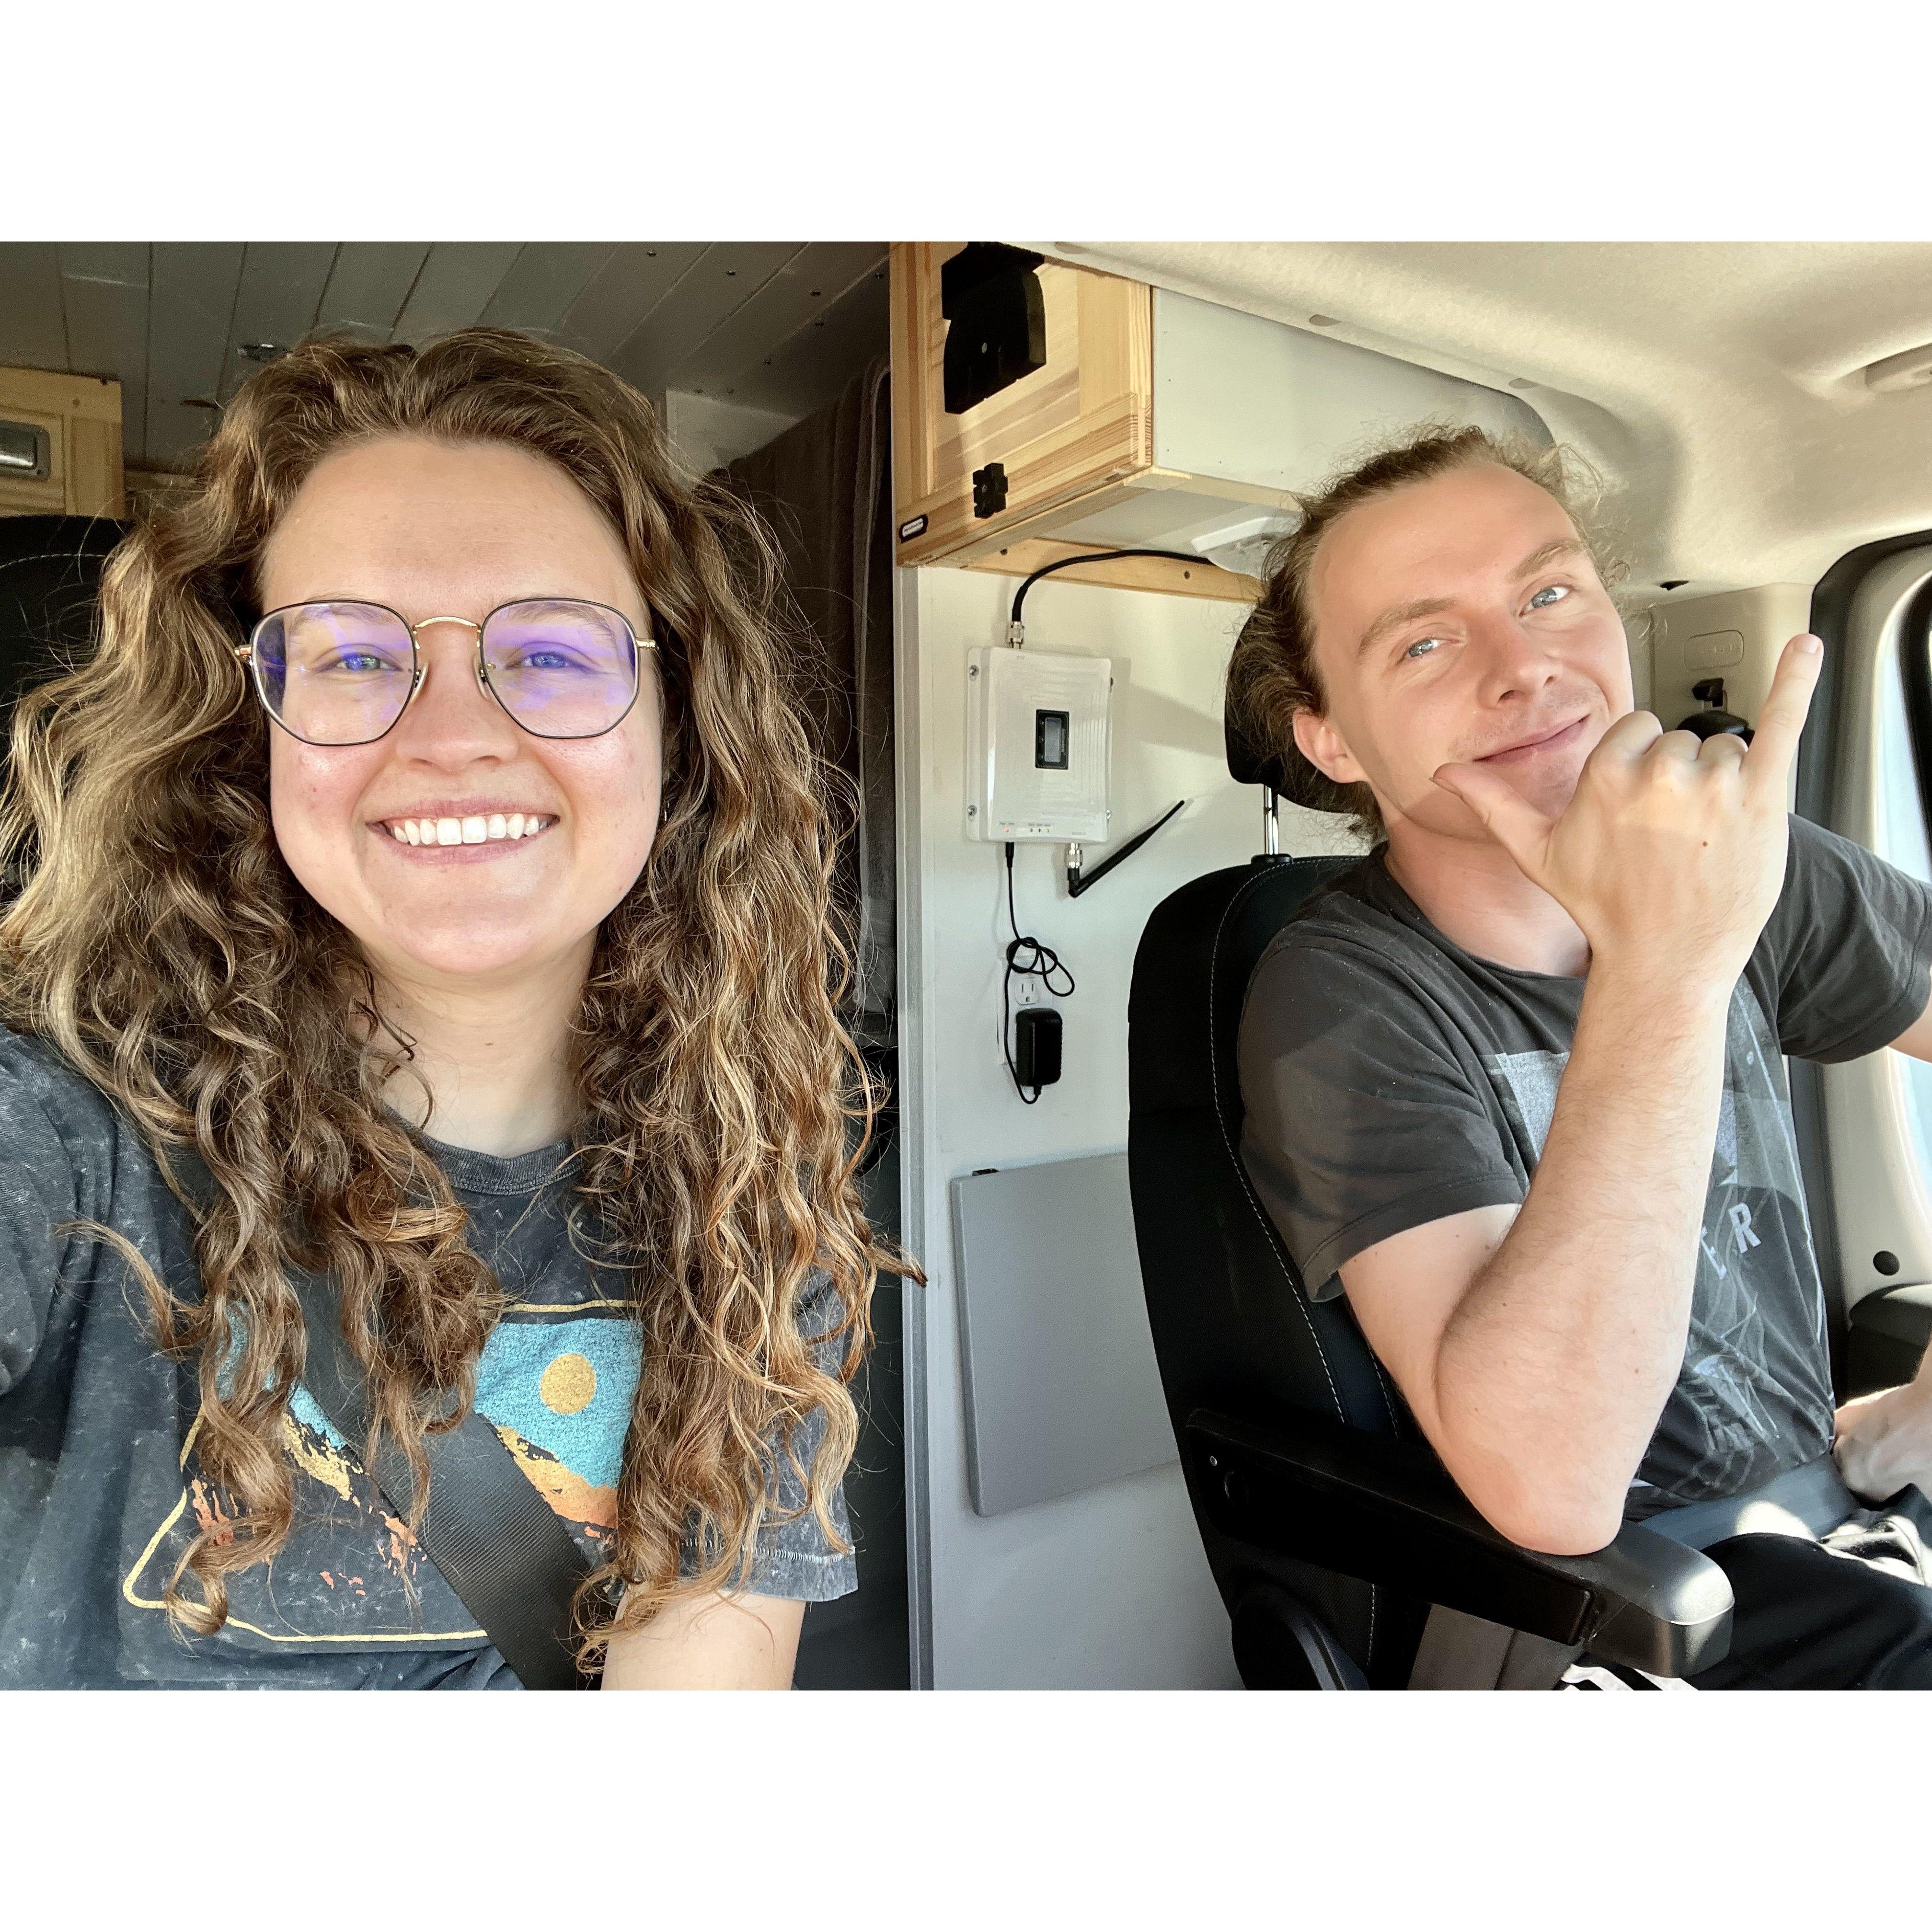 Lived in a Van for a week visiting the pacific northwest